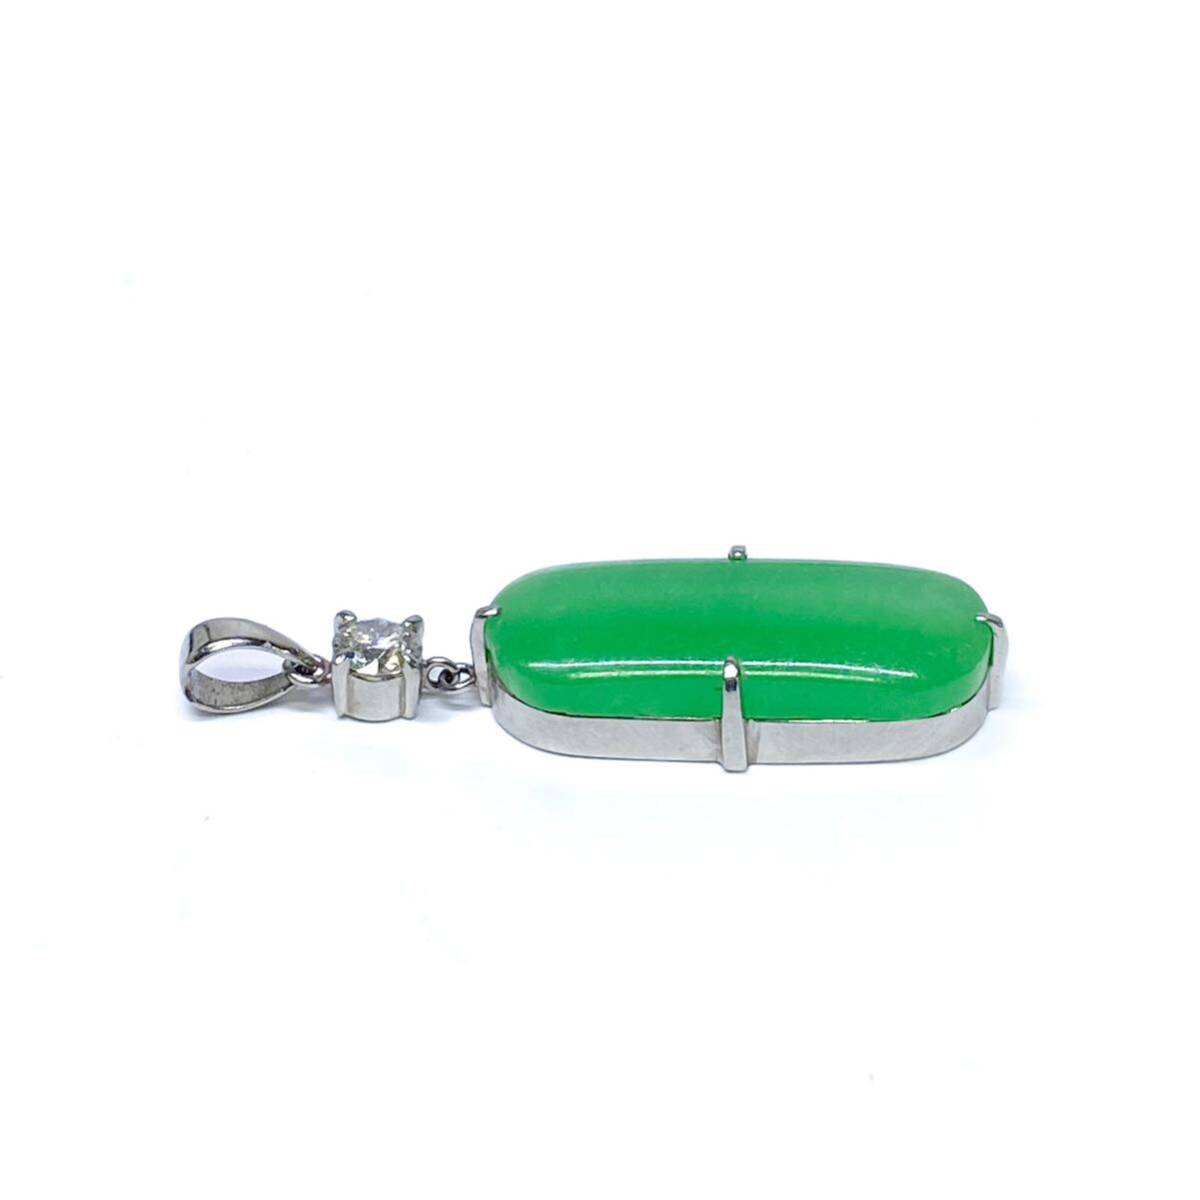 ! Pt900.. jade pendant top gross weight approximately 4.2g platinum stamp equipped accessory jewelry necklace top charm 